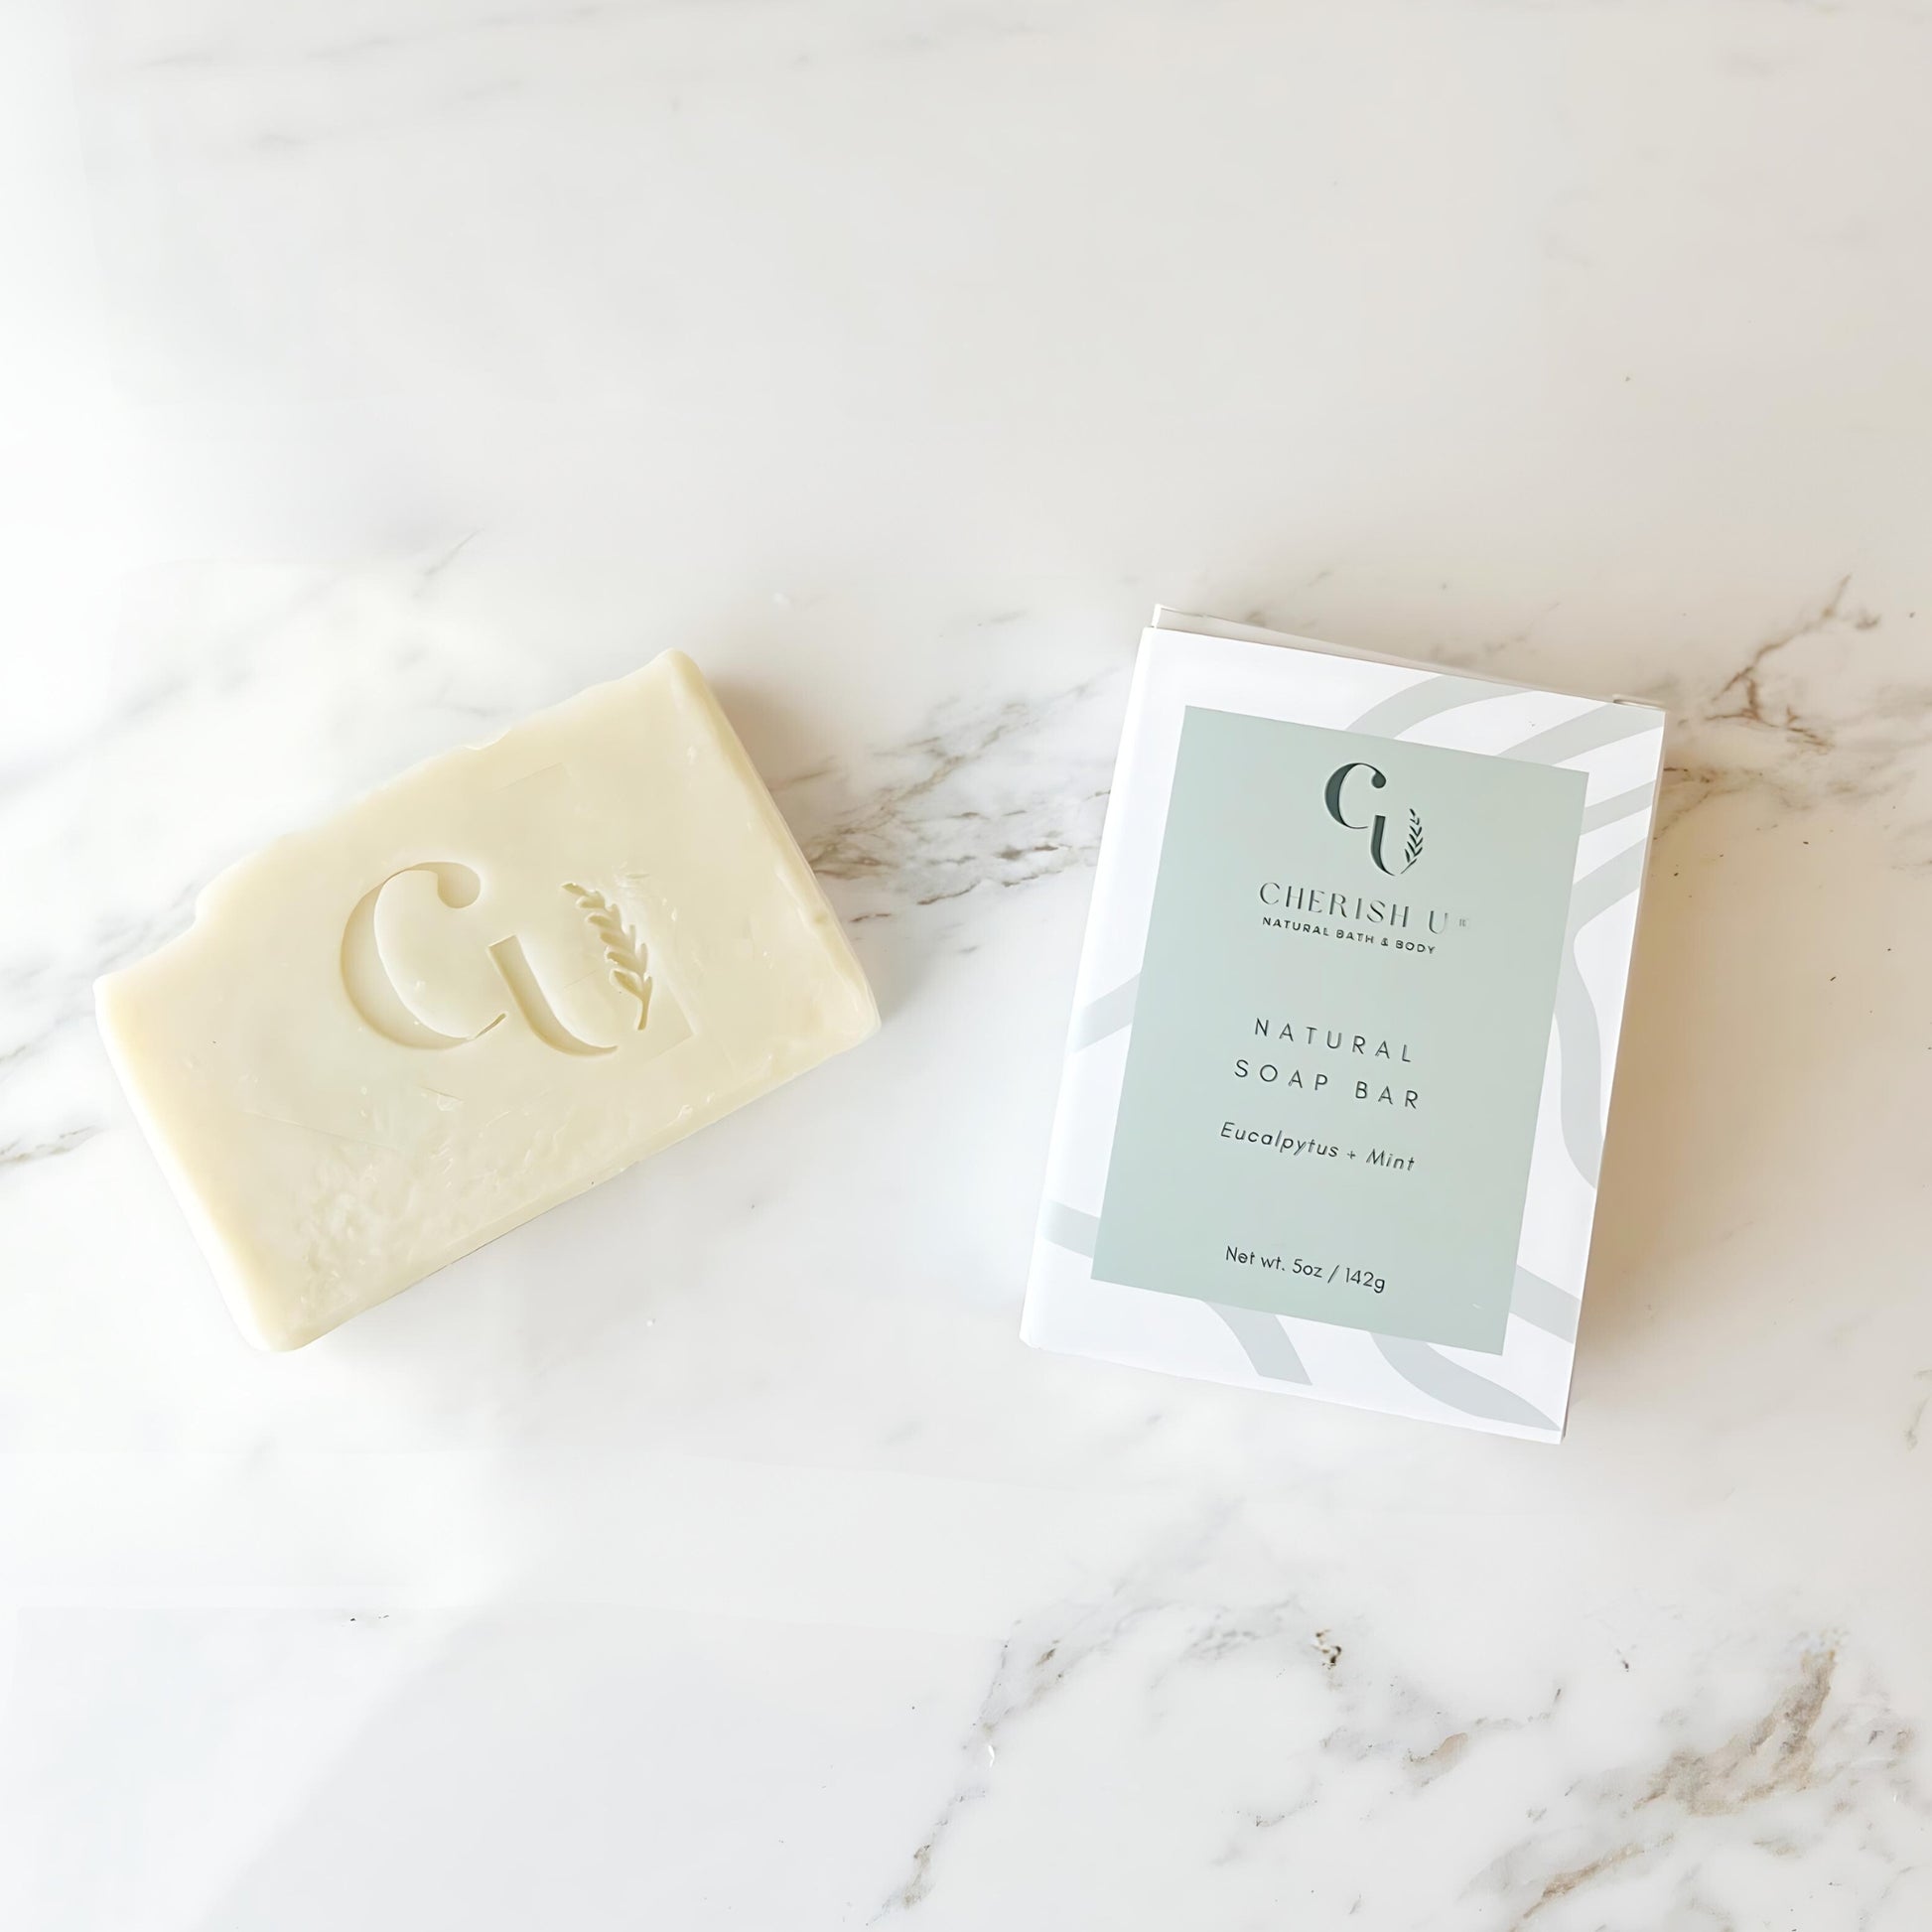 All-natural Eucalyptus + Mint Soap, infused with invigorating eucalyptus and refreshing mint essential oils, designed to cleanse and revitalize the skin.